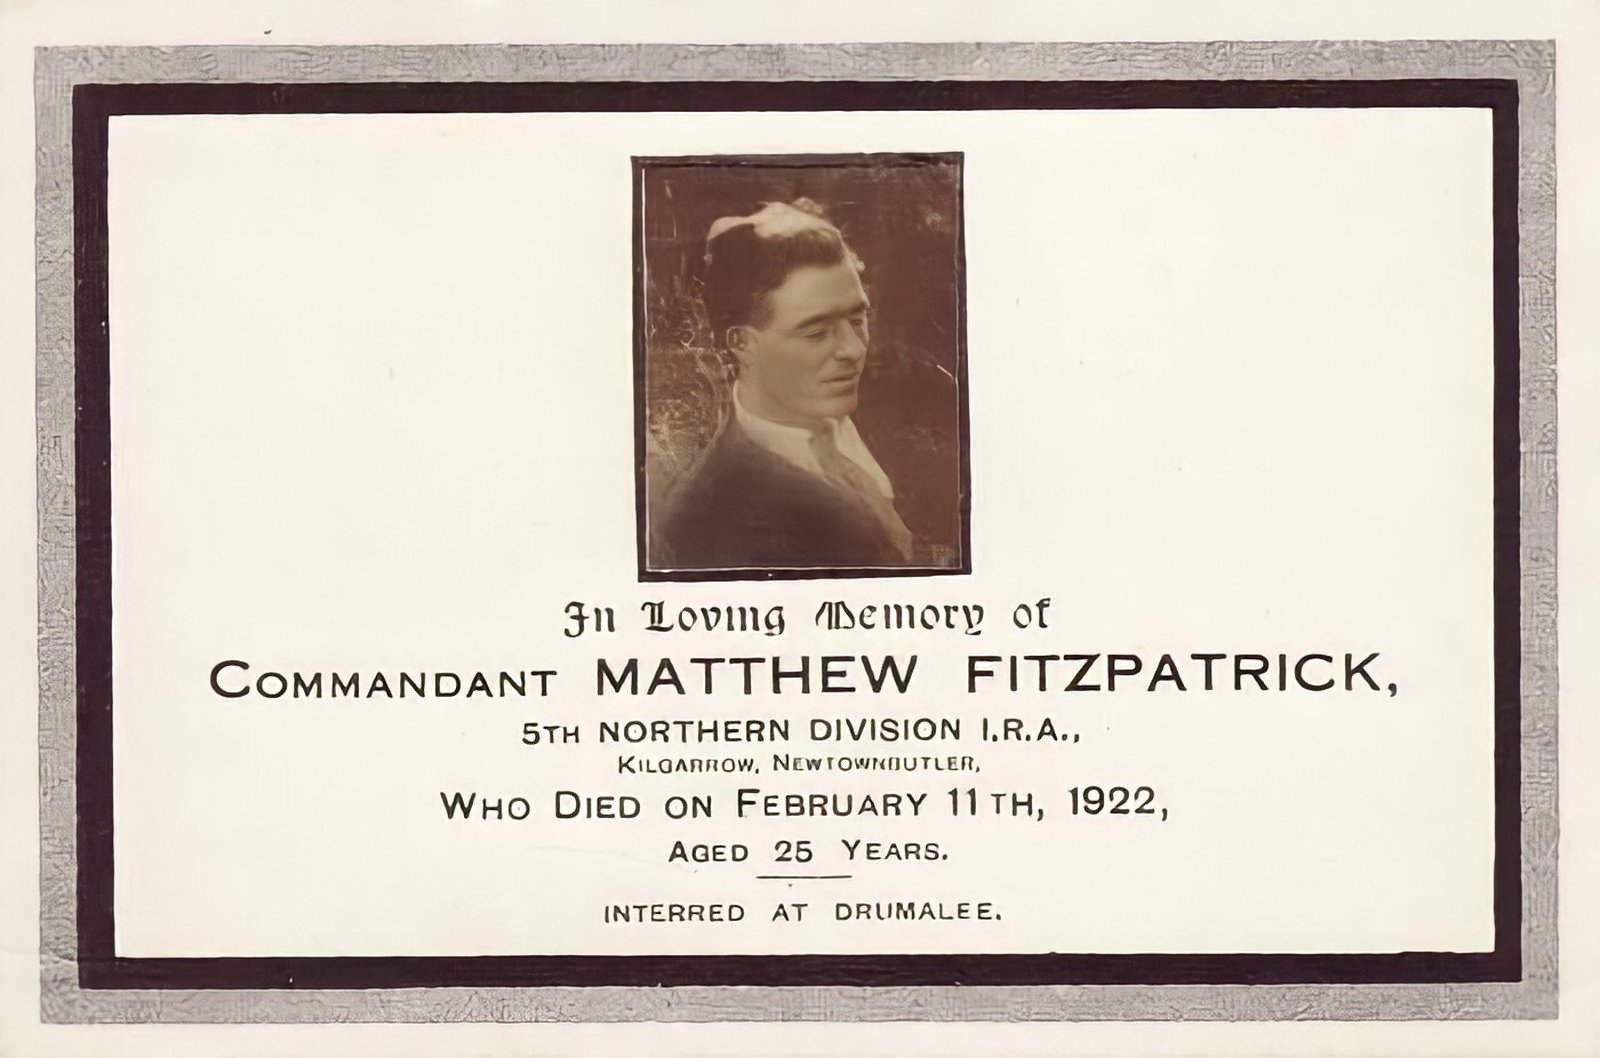 Image - FitzPatrick's memorial card (Courtesy of Whytes.com Auctioneers)